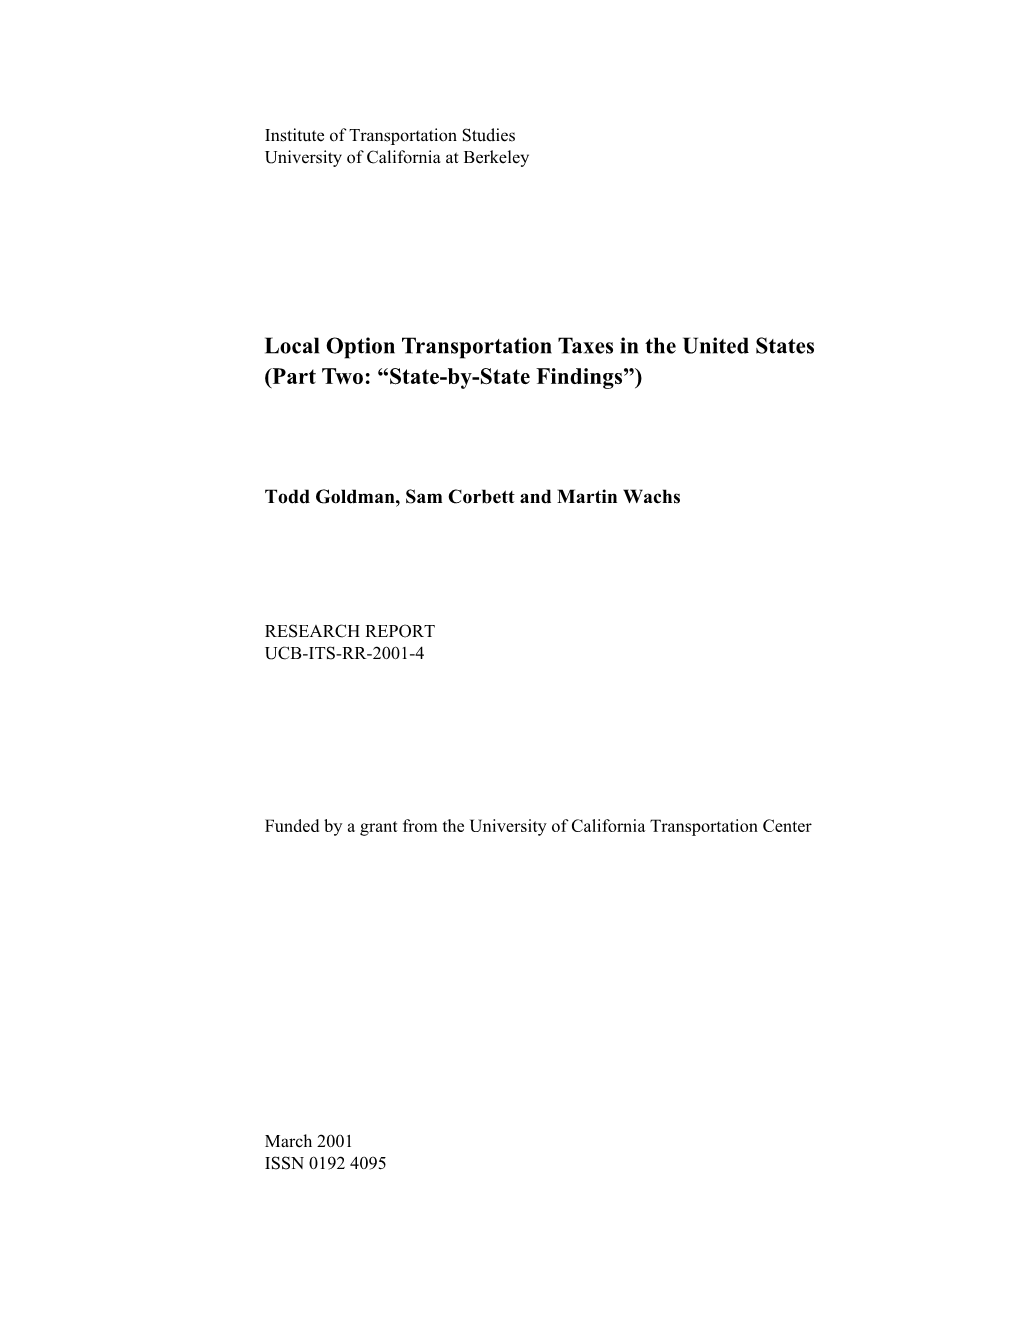 Local Option Transportation Taxes in the United States (Part Two: “State-By-State Findings”)